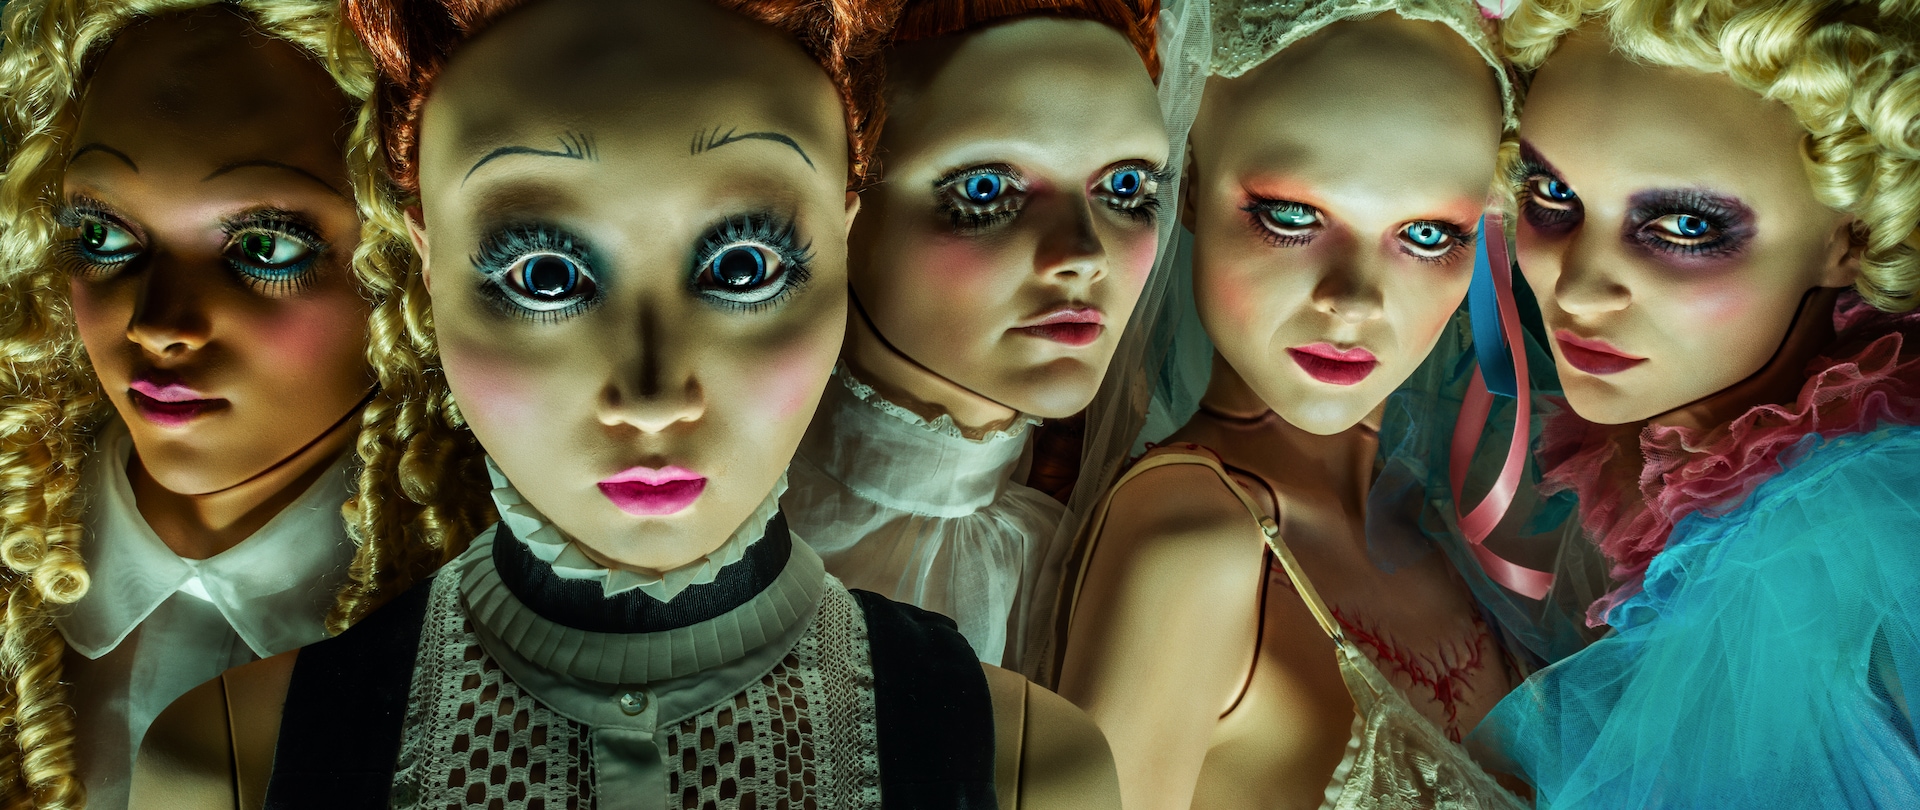 American Horror Stories Installment 2 dolls staring with makeup